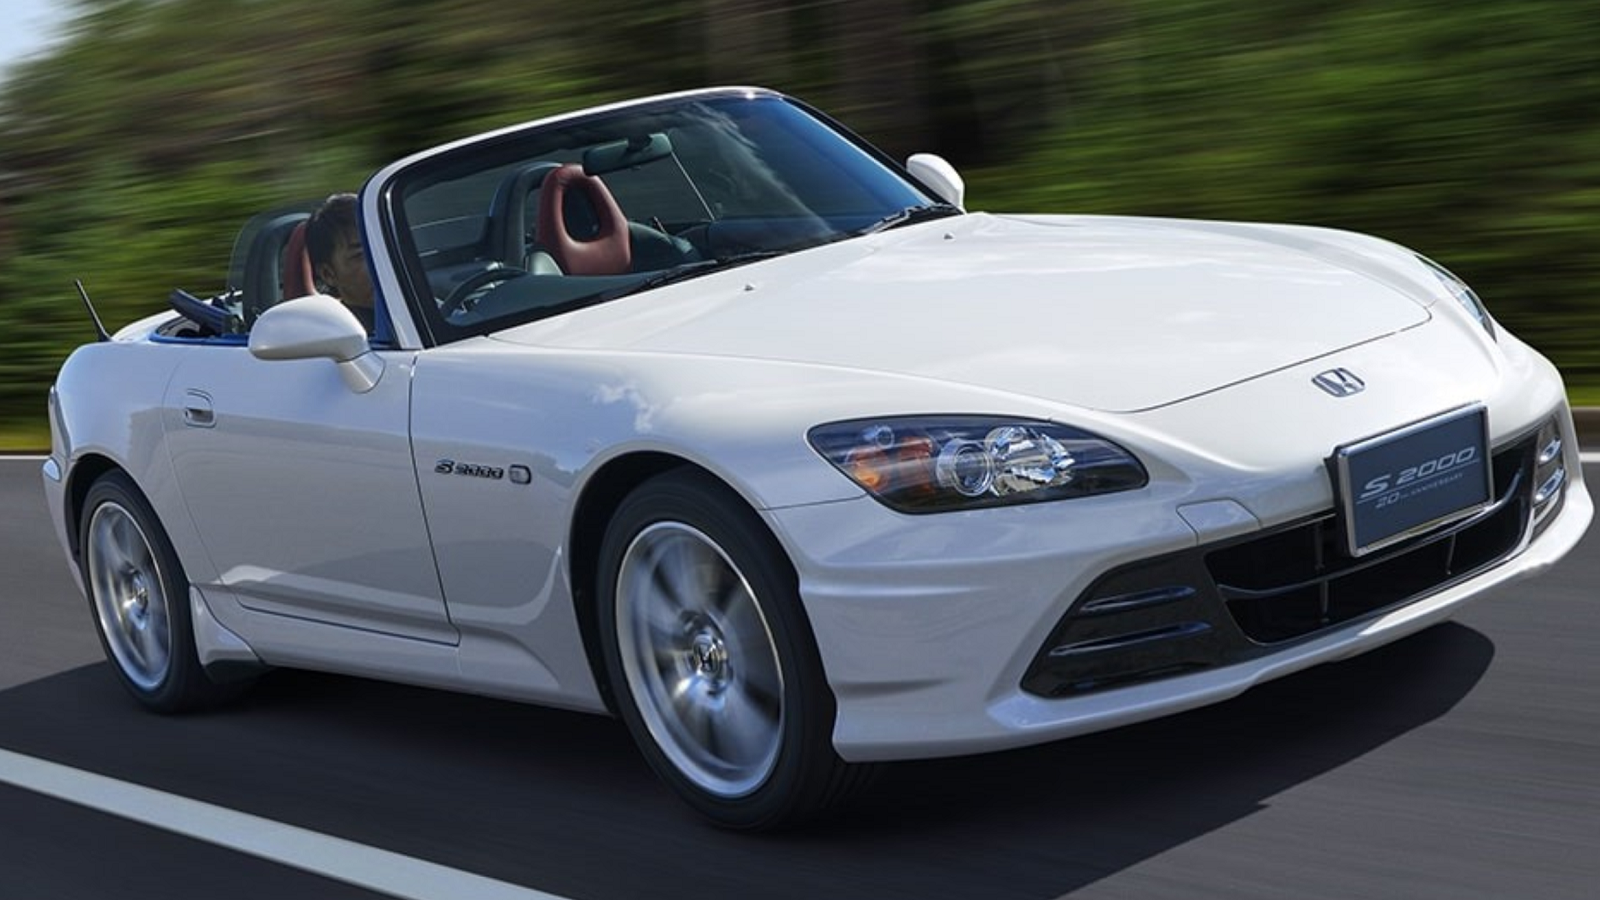 Beliggenhed suppe New Zealand Get Your 20th Anniversary S2000 Parts Now | S2ki